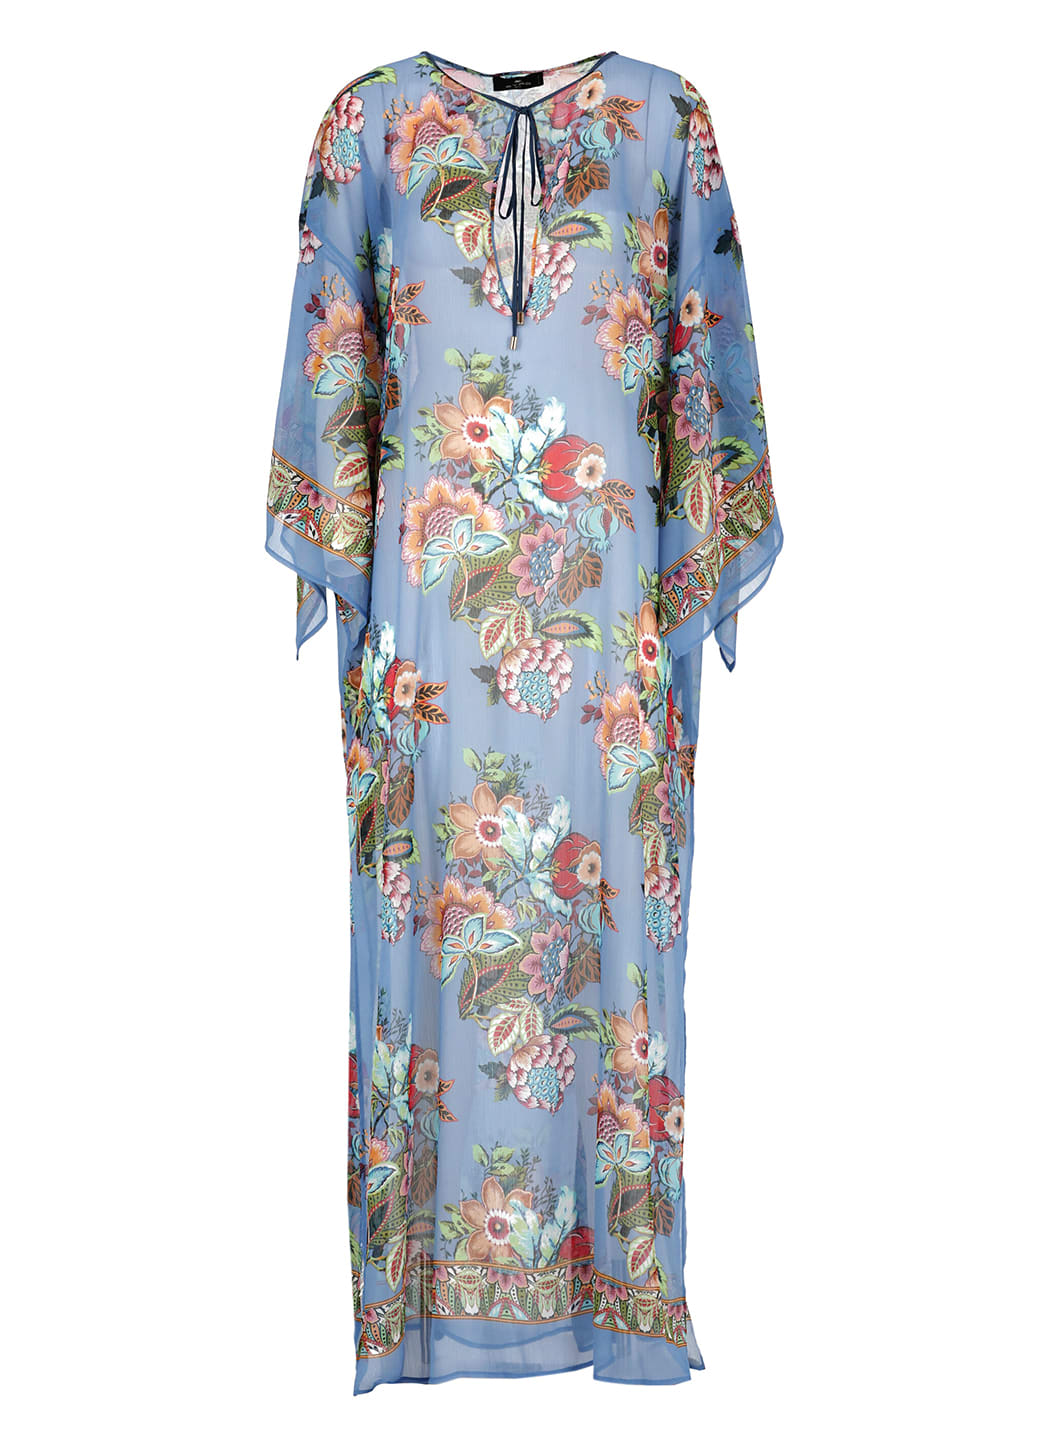 ETRO DRESS WITH FLORAL PATTERN